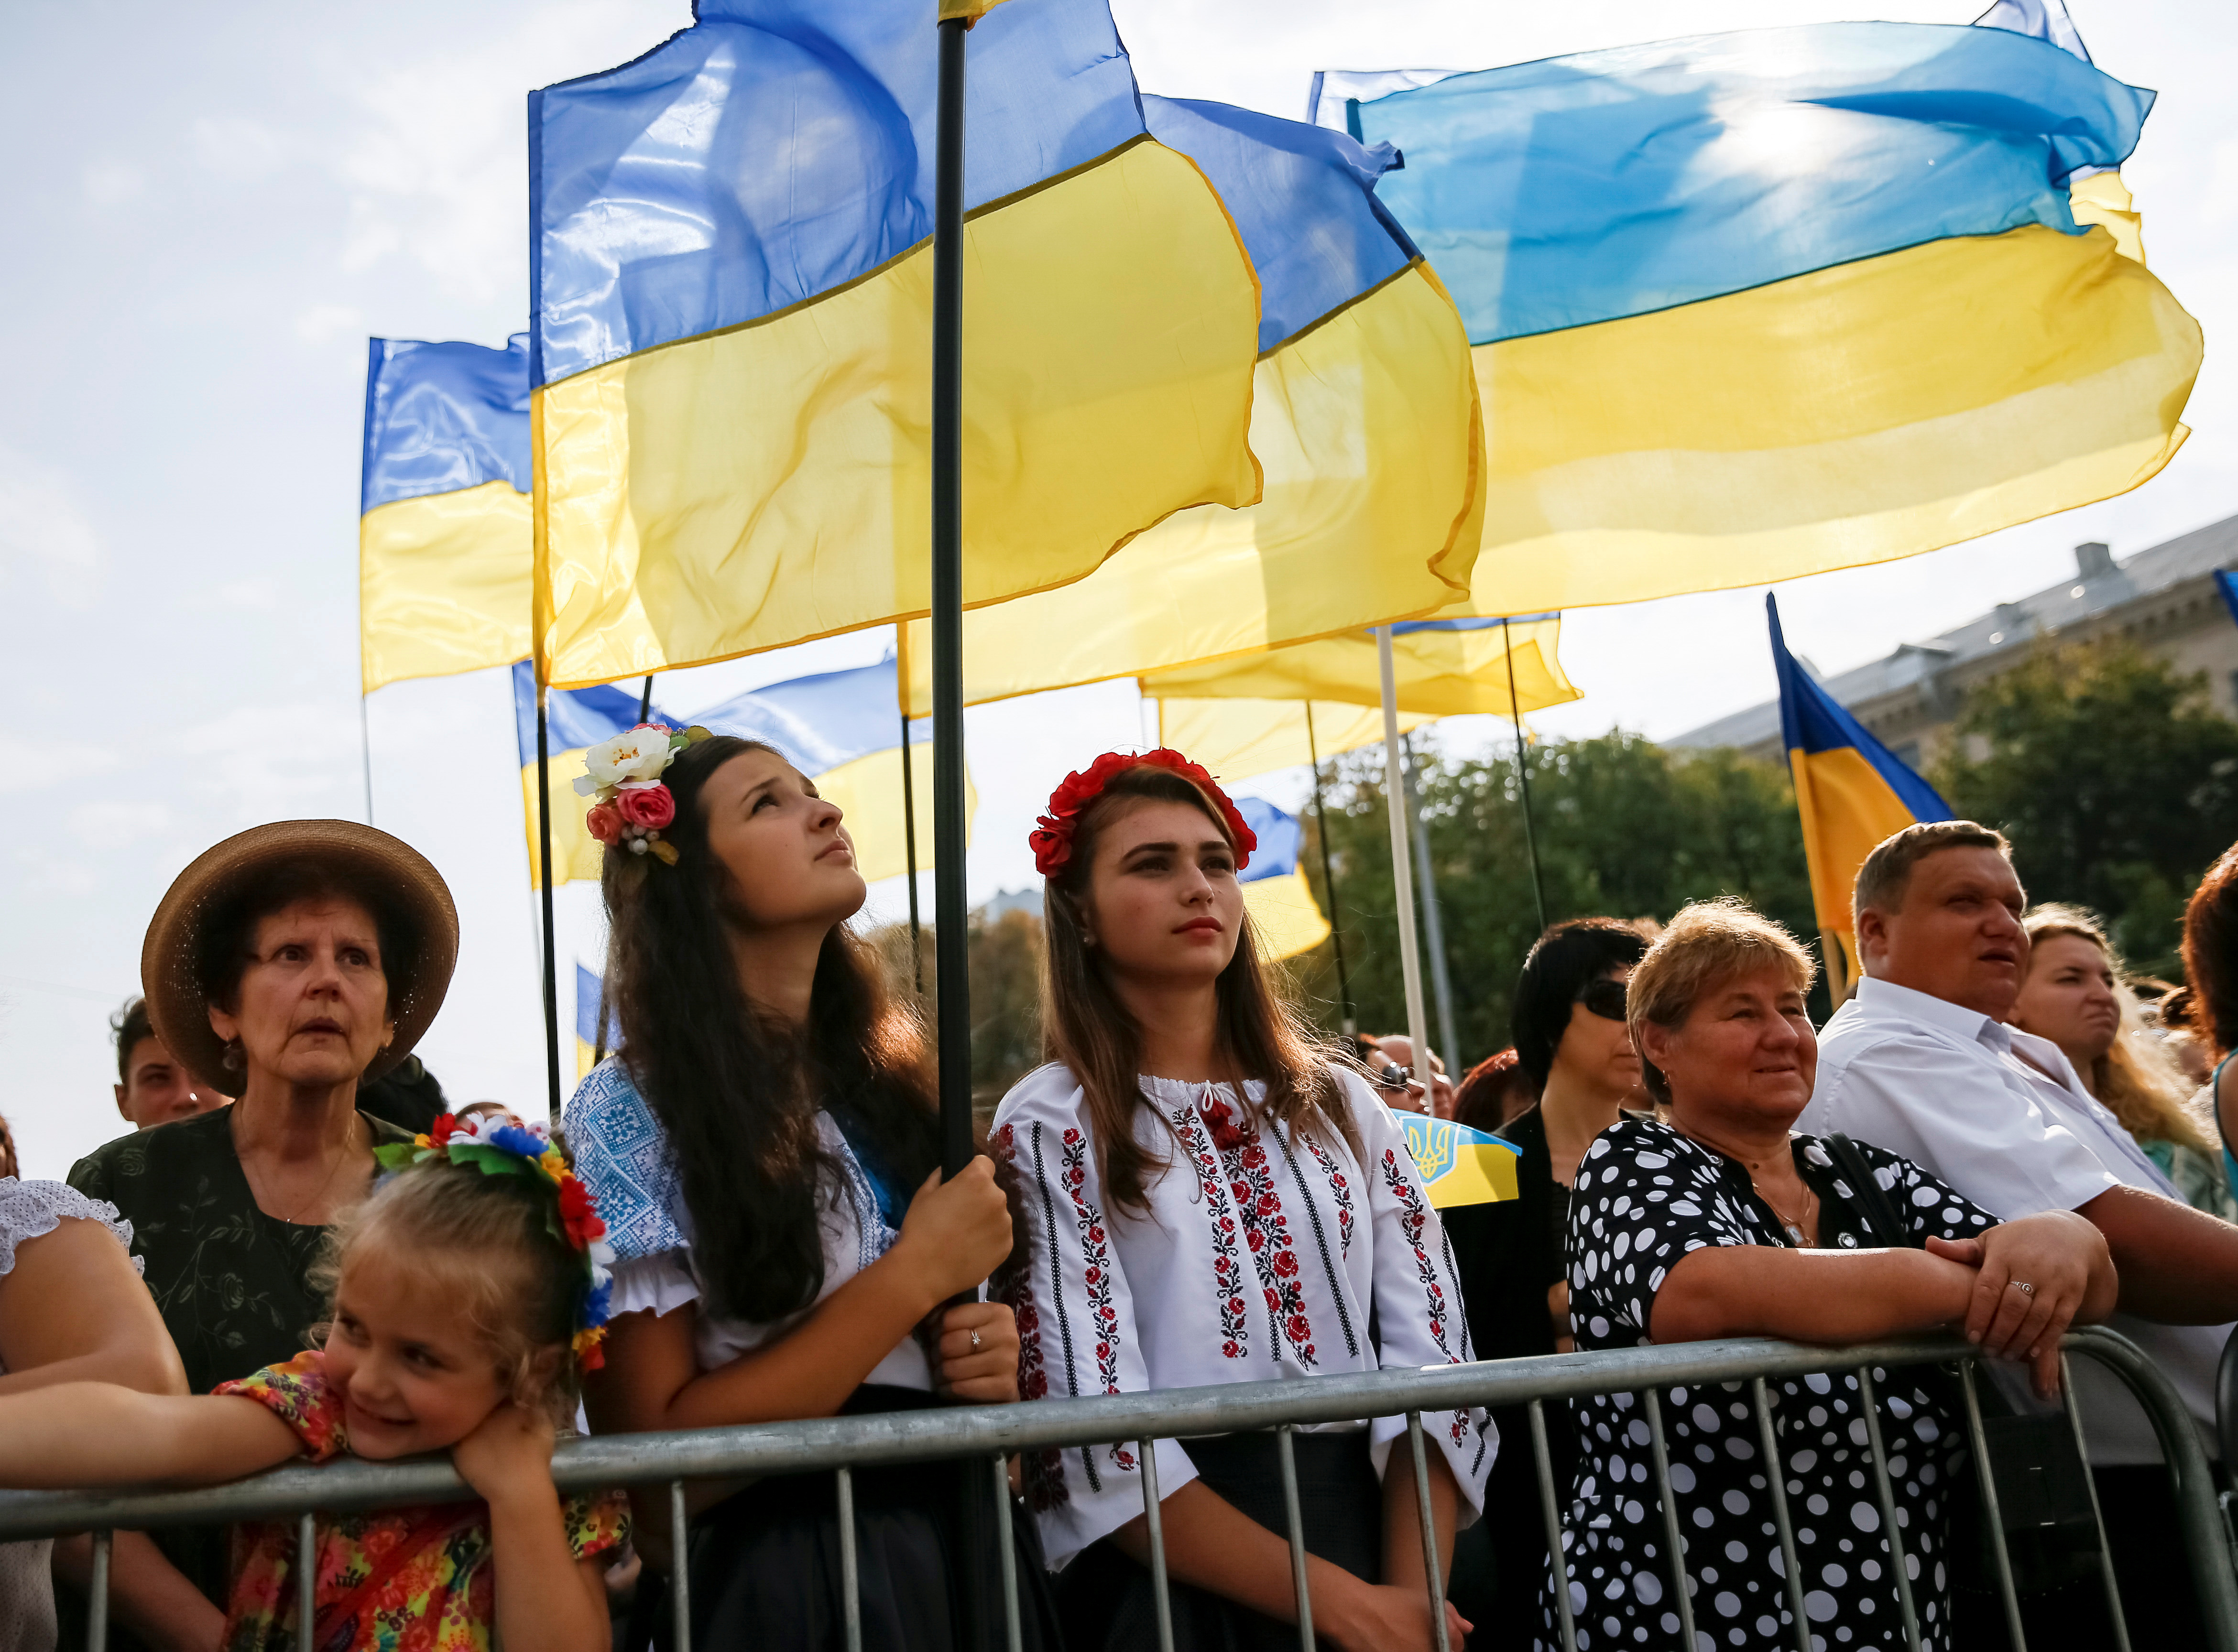 How Ukraine views Russia and the West